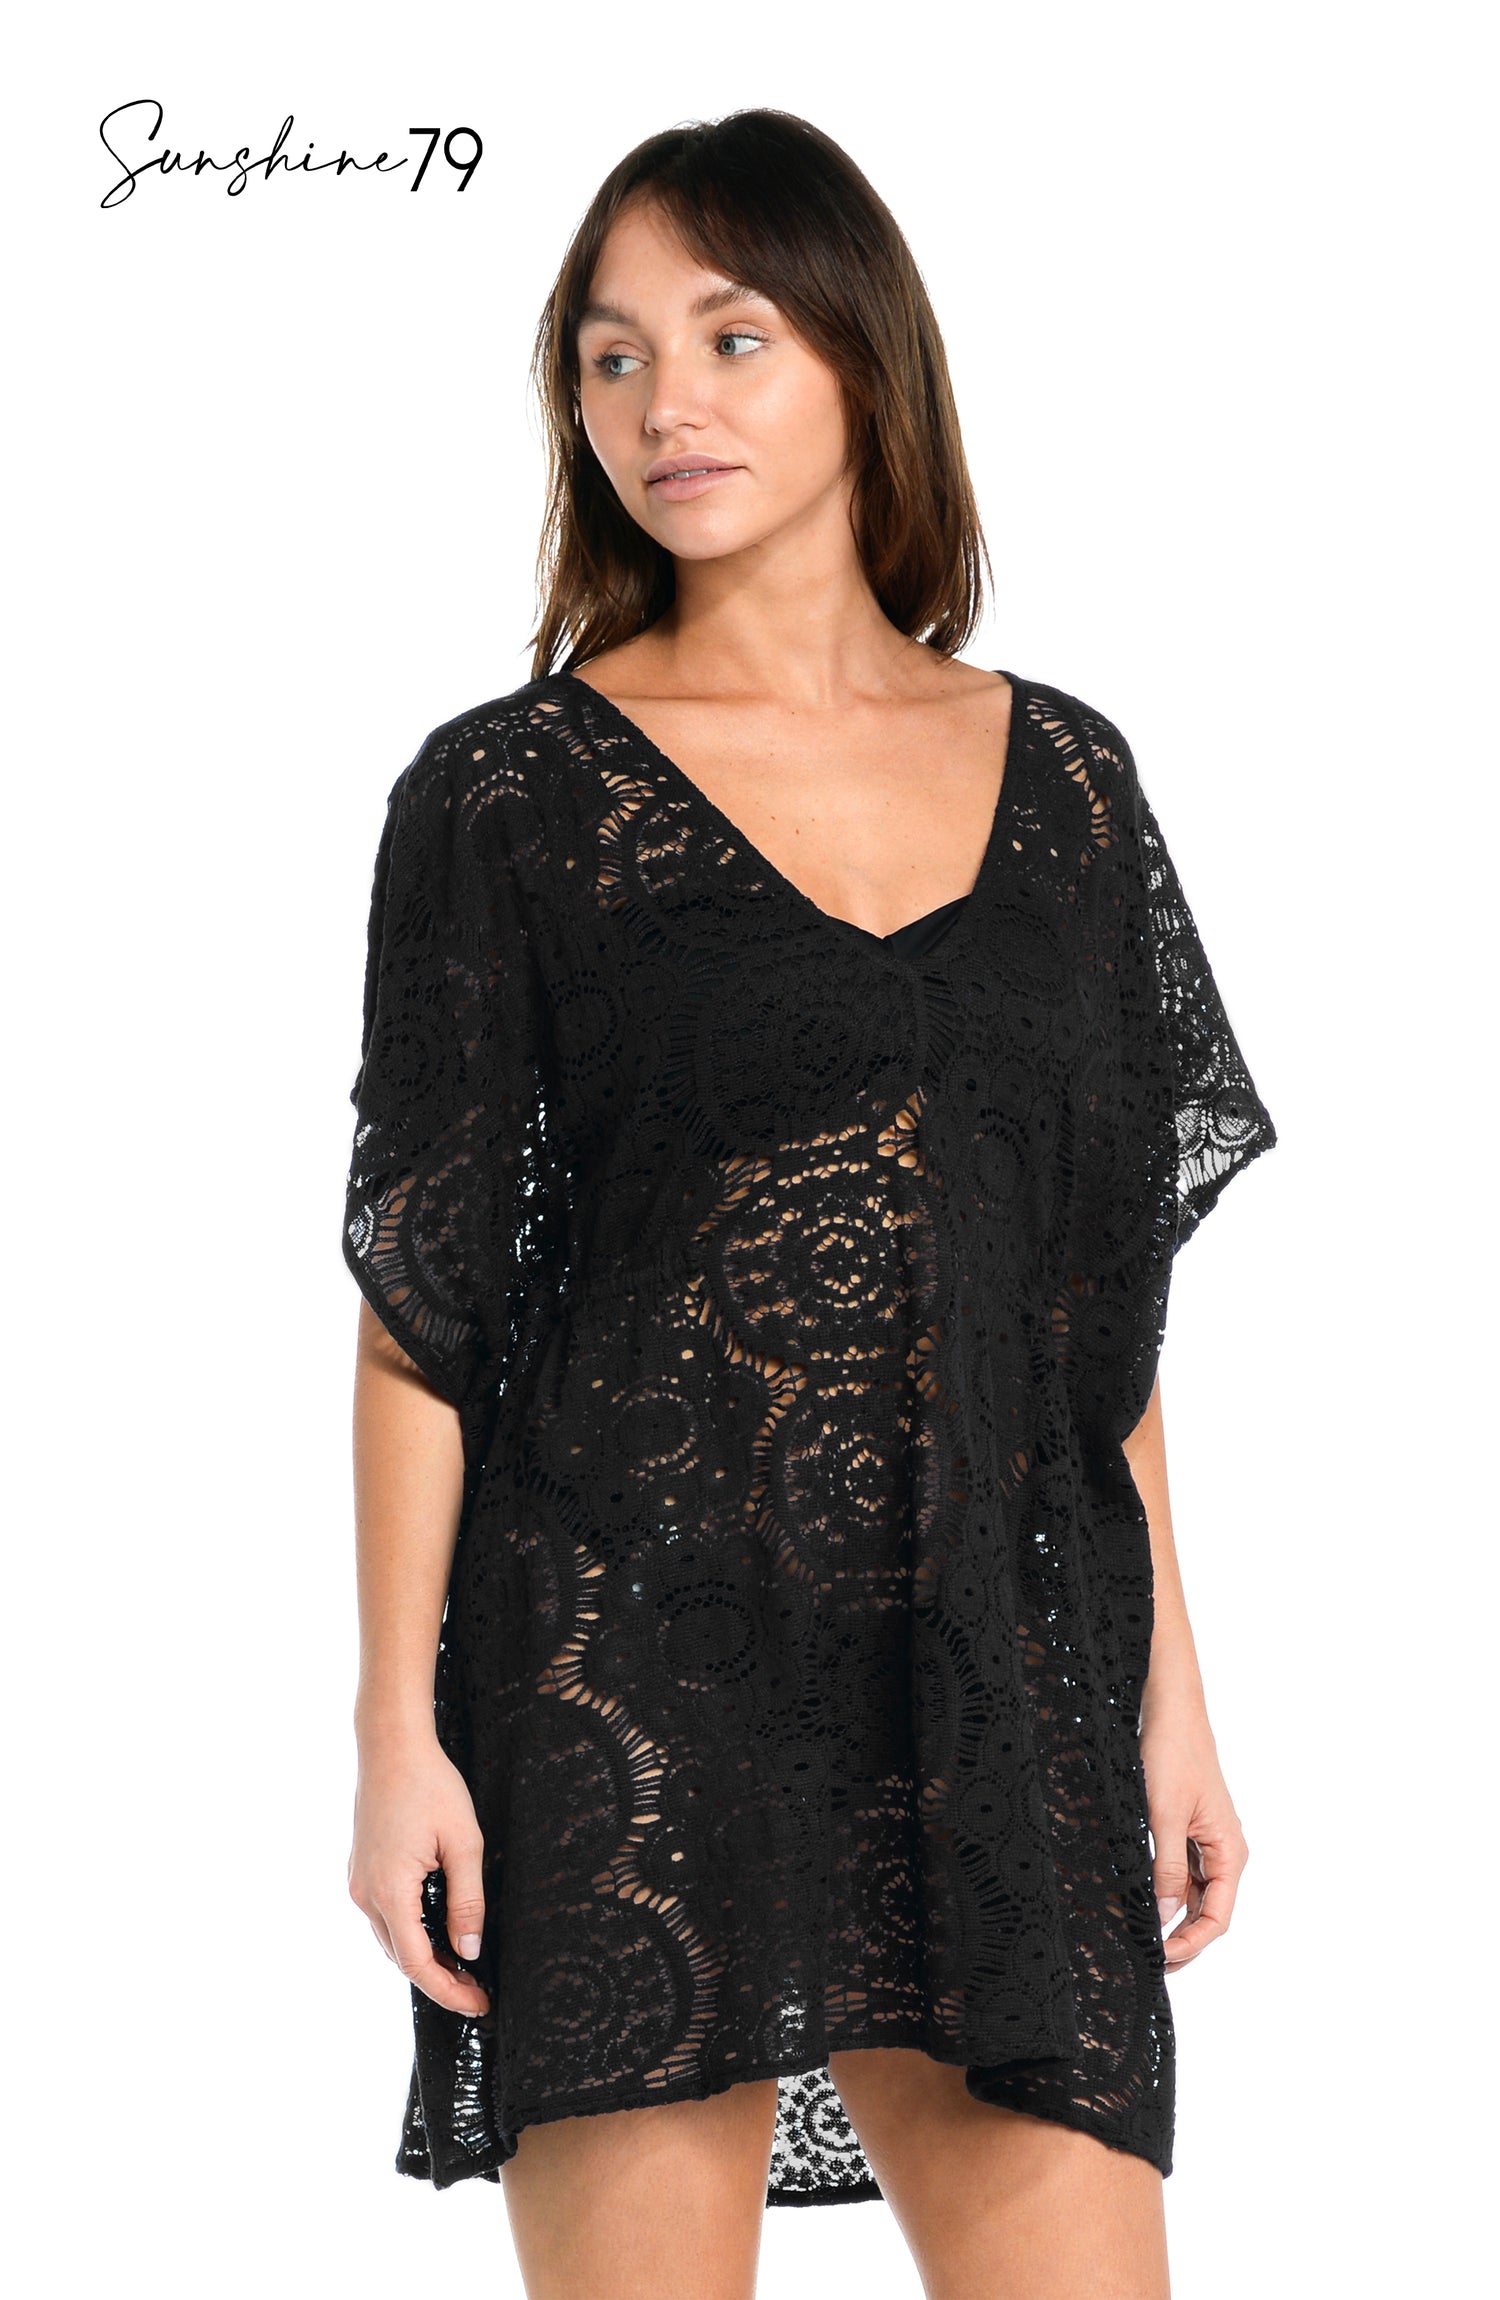 Model is wearing a black colored crochet tunic cover up from our Chillin Crochet collection!